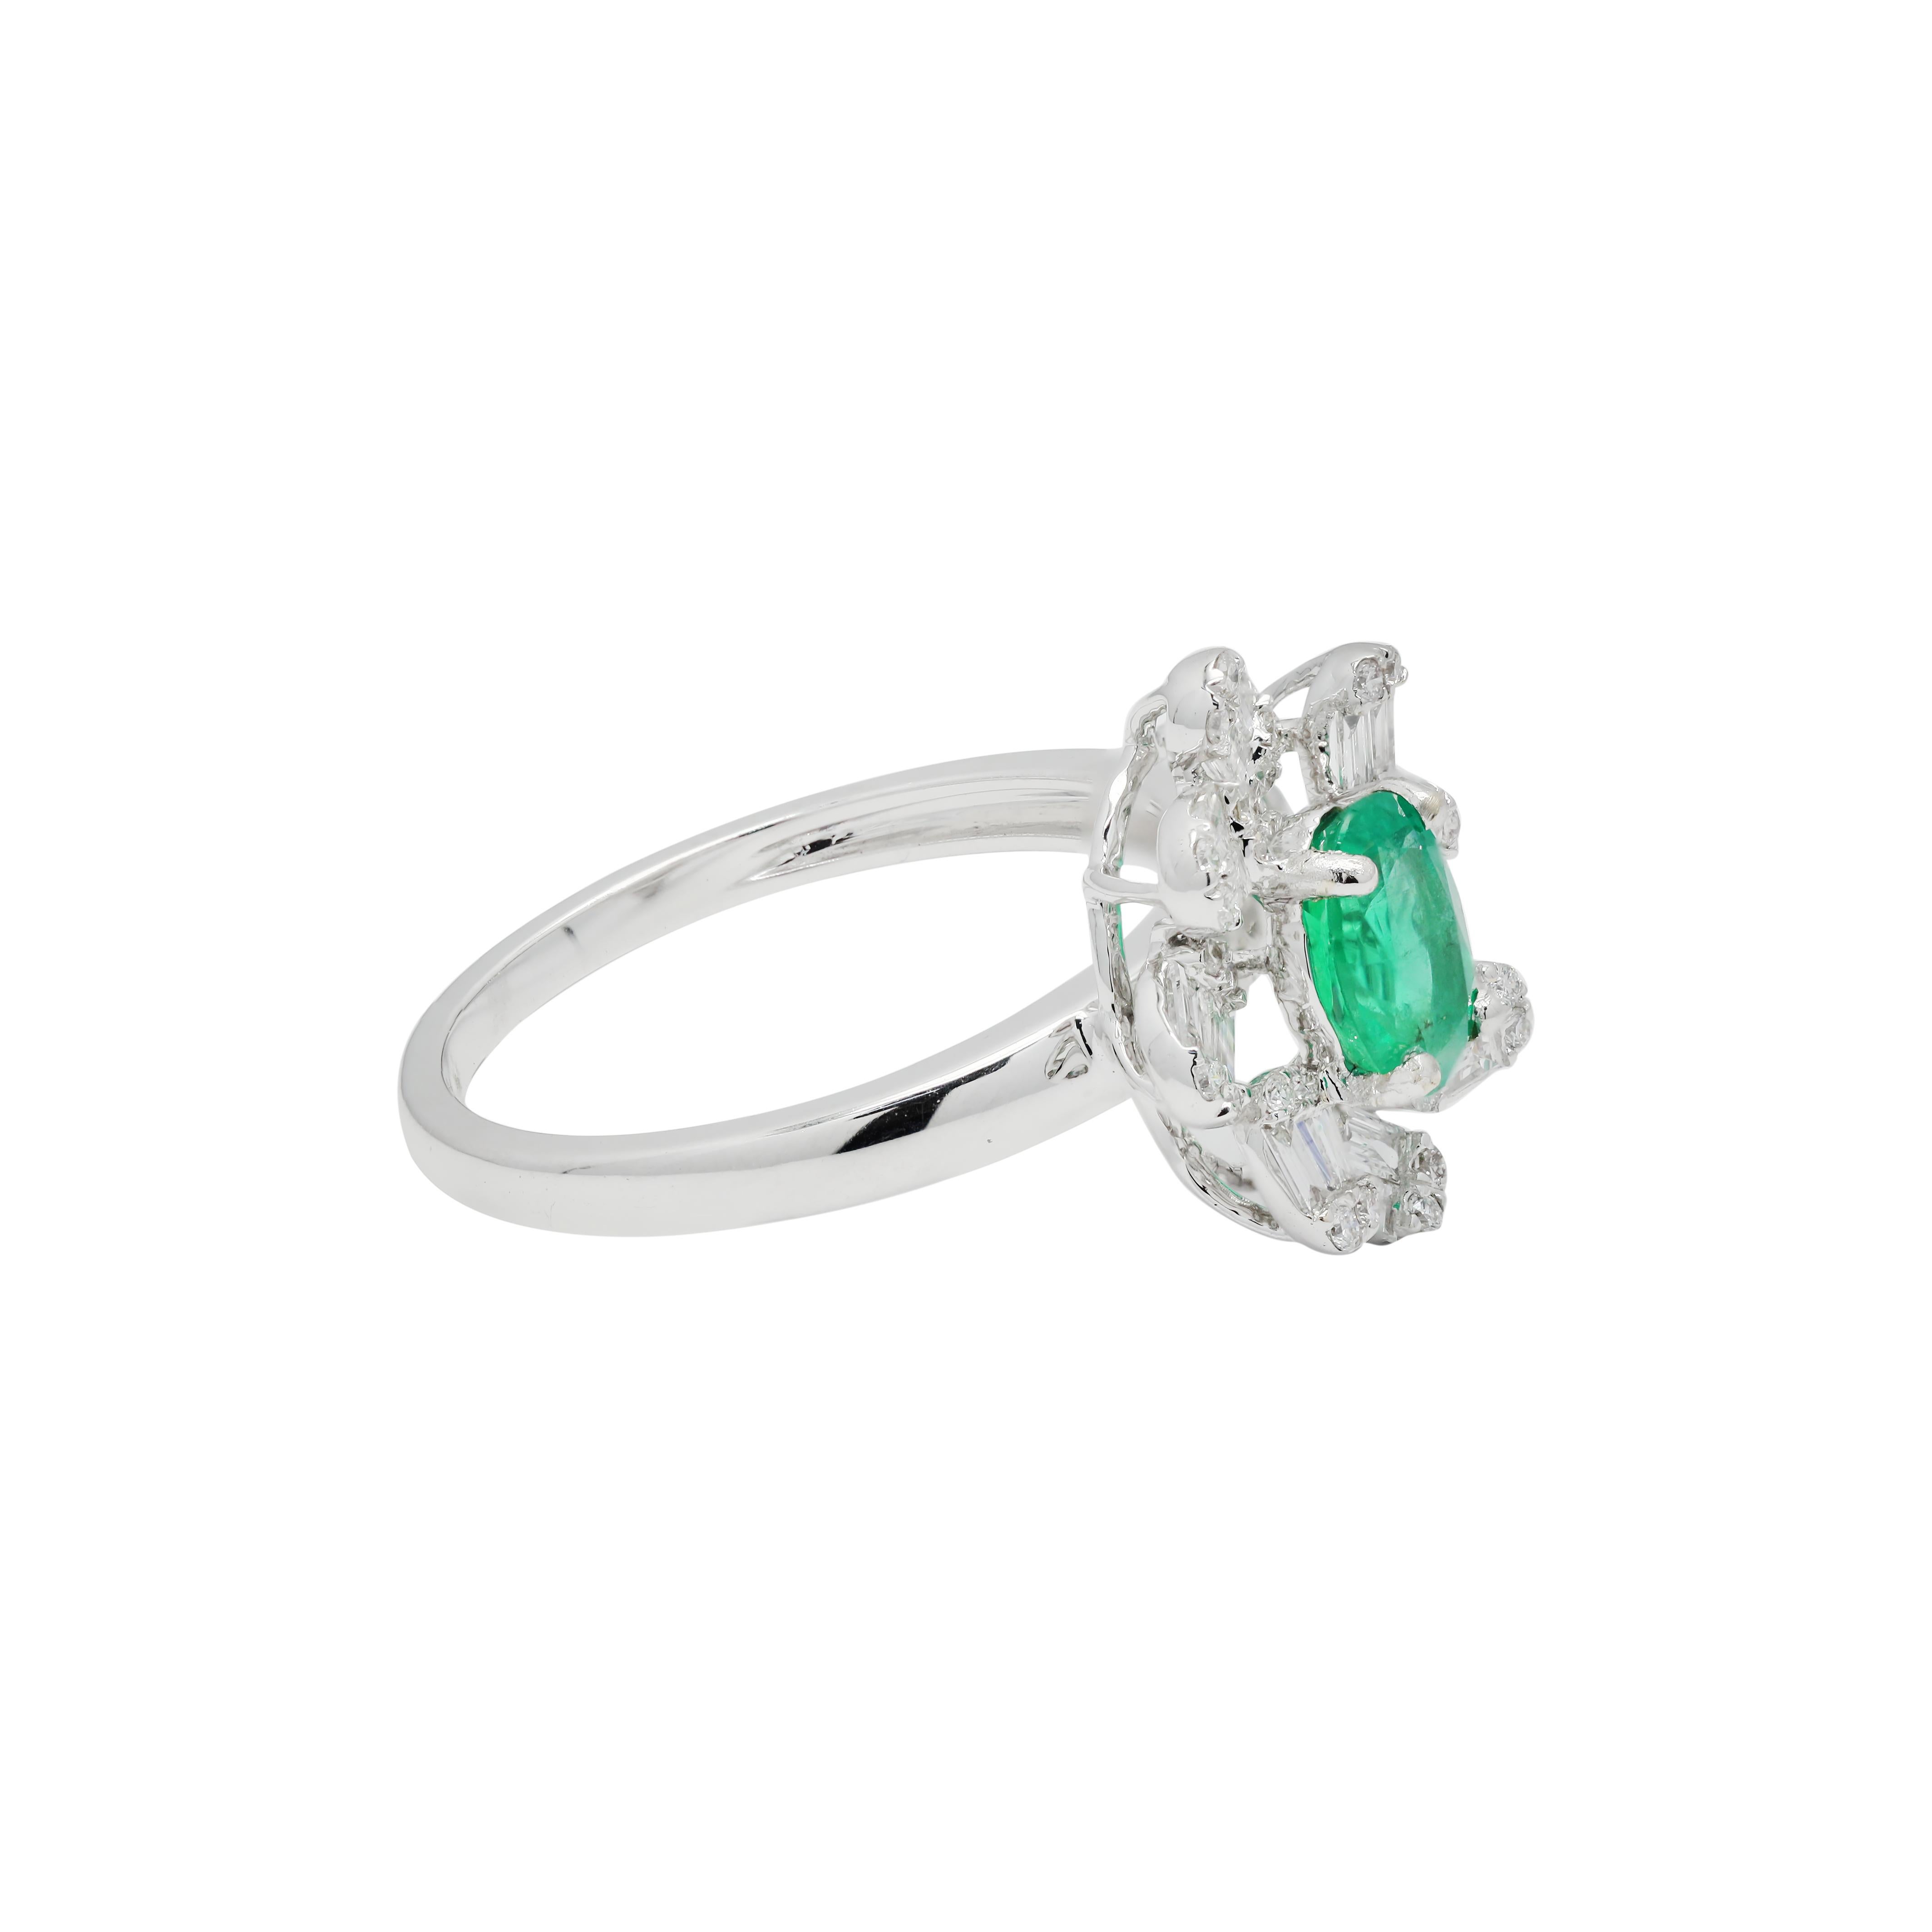 For Sale:  Designer Oval Cut Emerald and Diamond Engagement Ring in 18K Solid White Gold 3